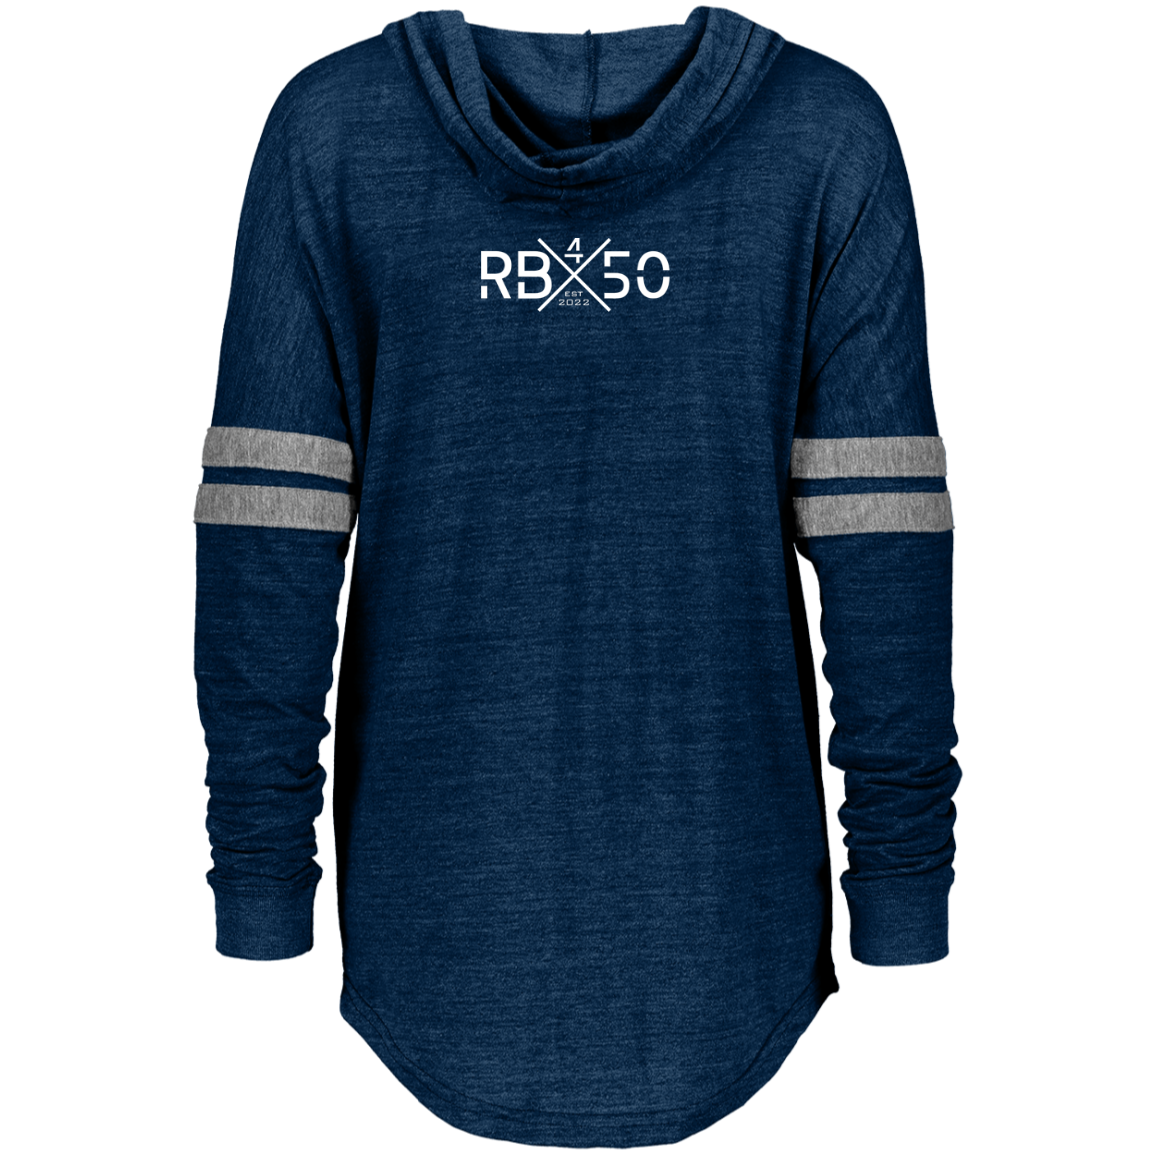 RB450 Ladies Lifestyle Hooded Low Key Pullover